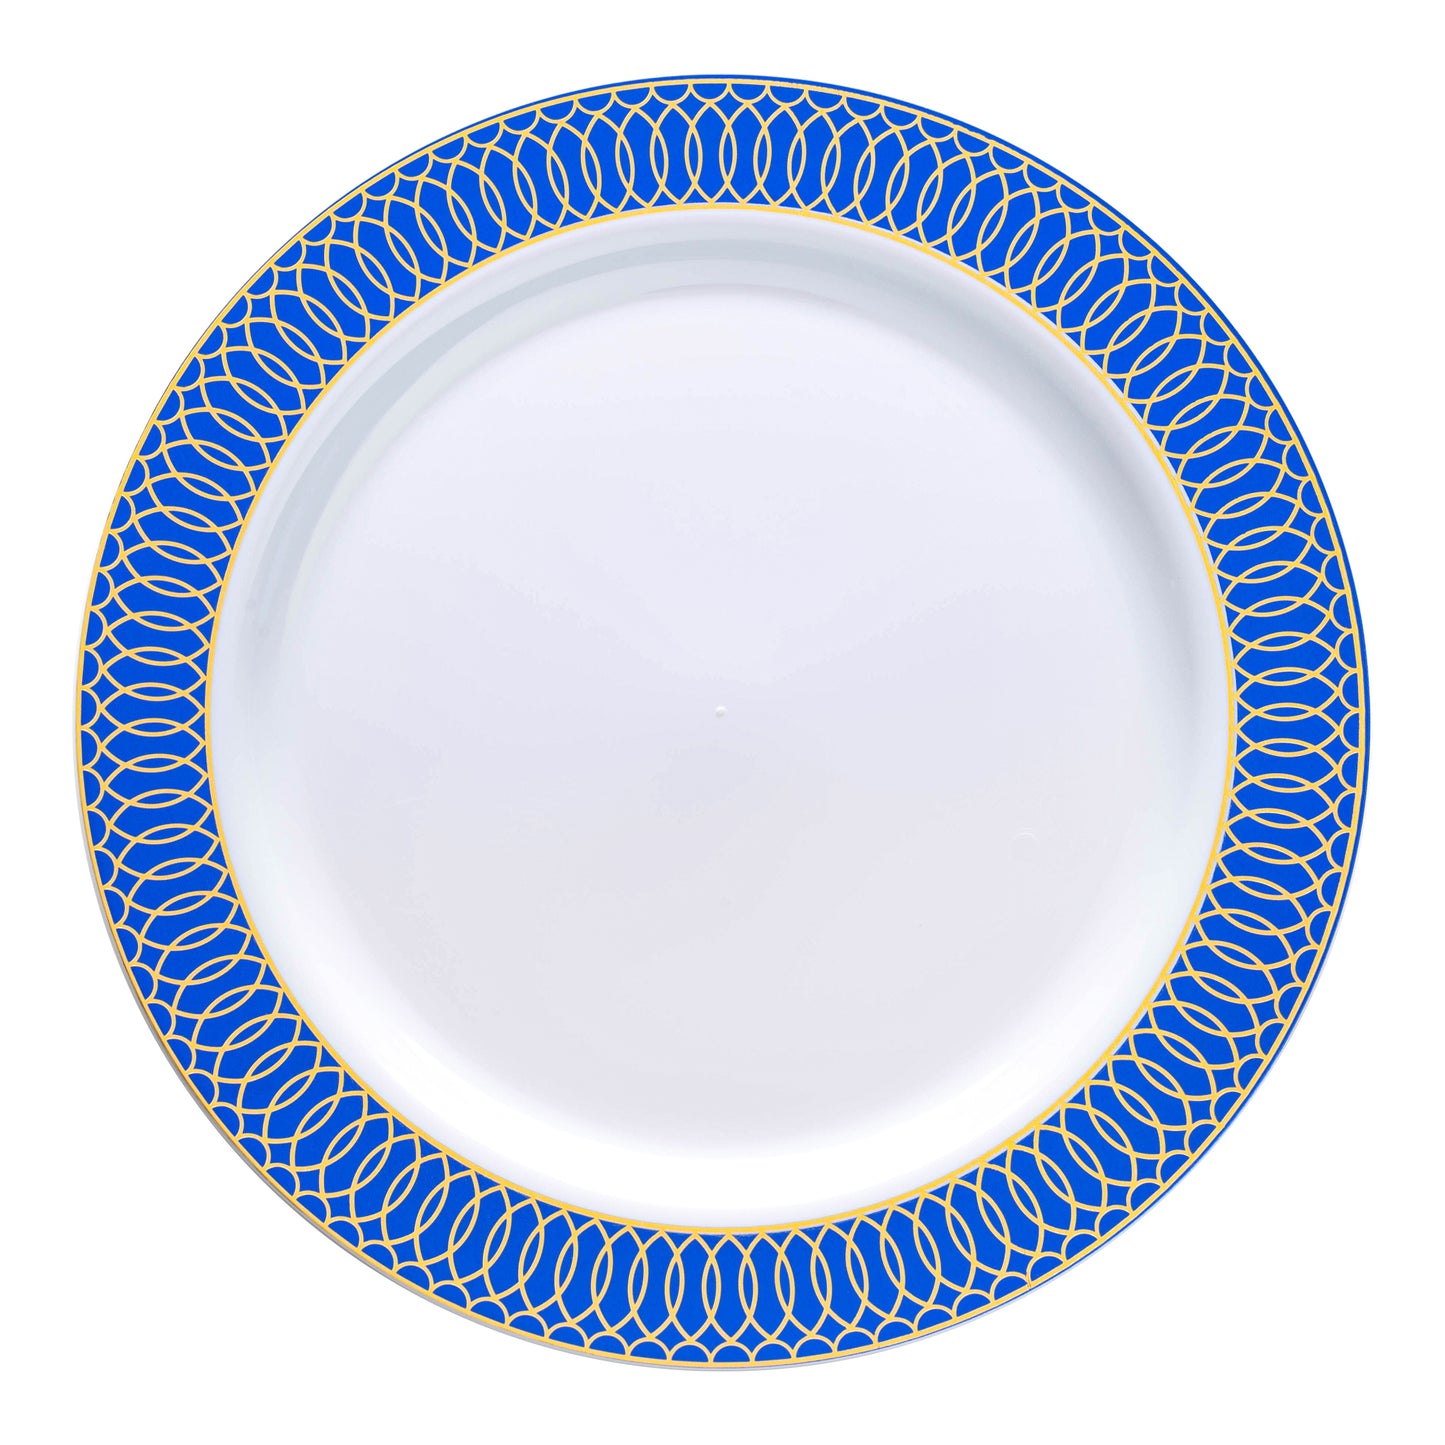 White with Gold Spiral on Blue Rim Plastic Appetizer/Salad Plates (7.5") | The Kaya Collection